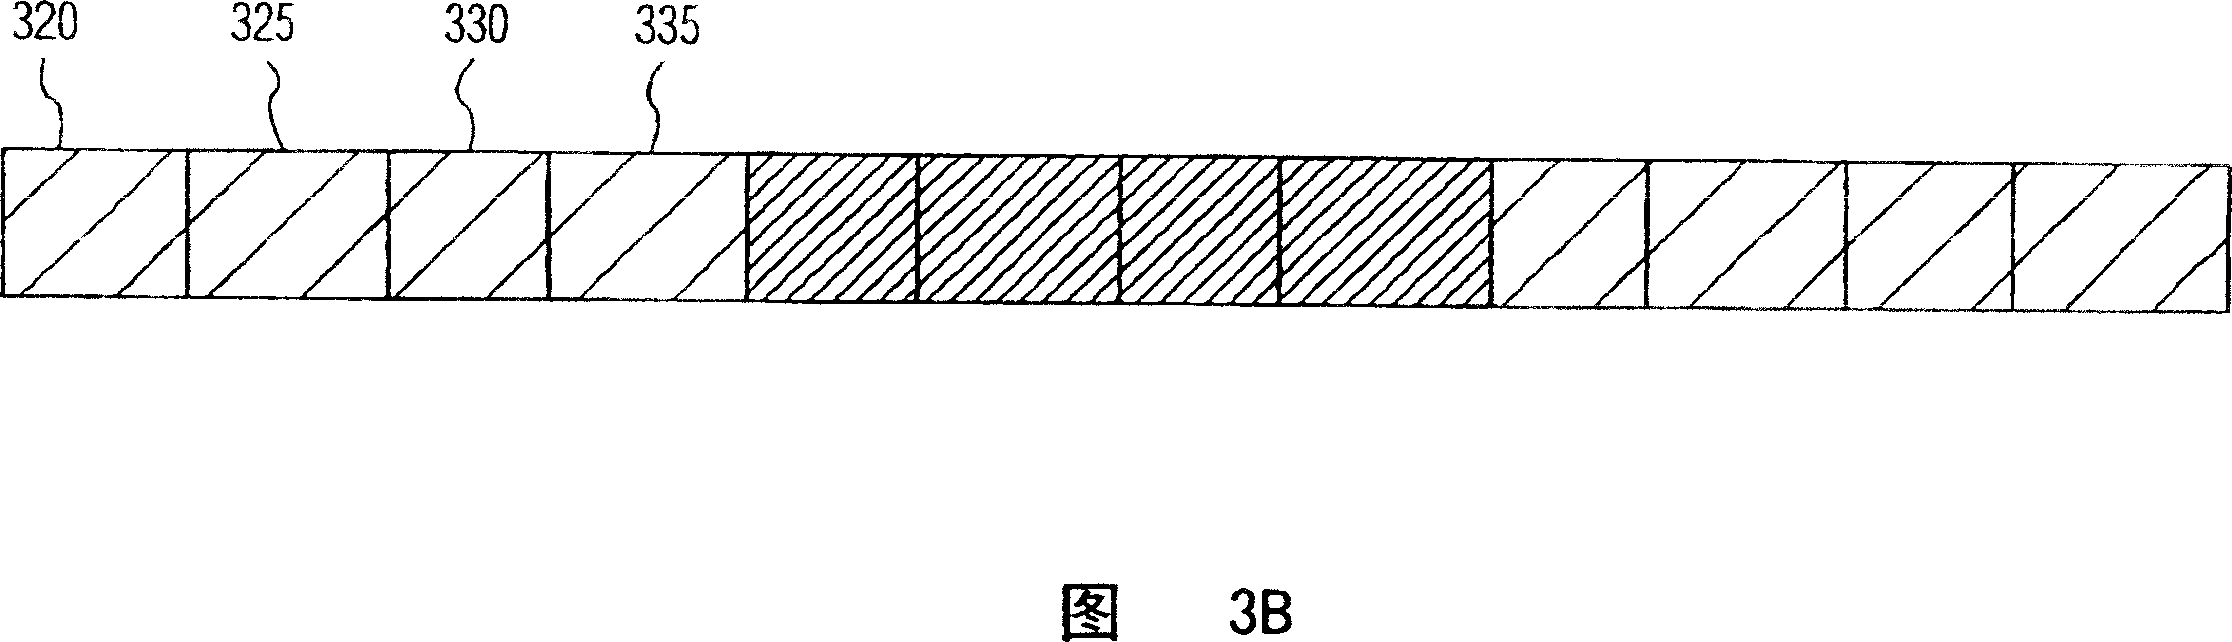 Superframe protocol packet data unit format having multirate packet aggregation for wireless systems